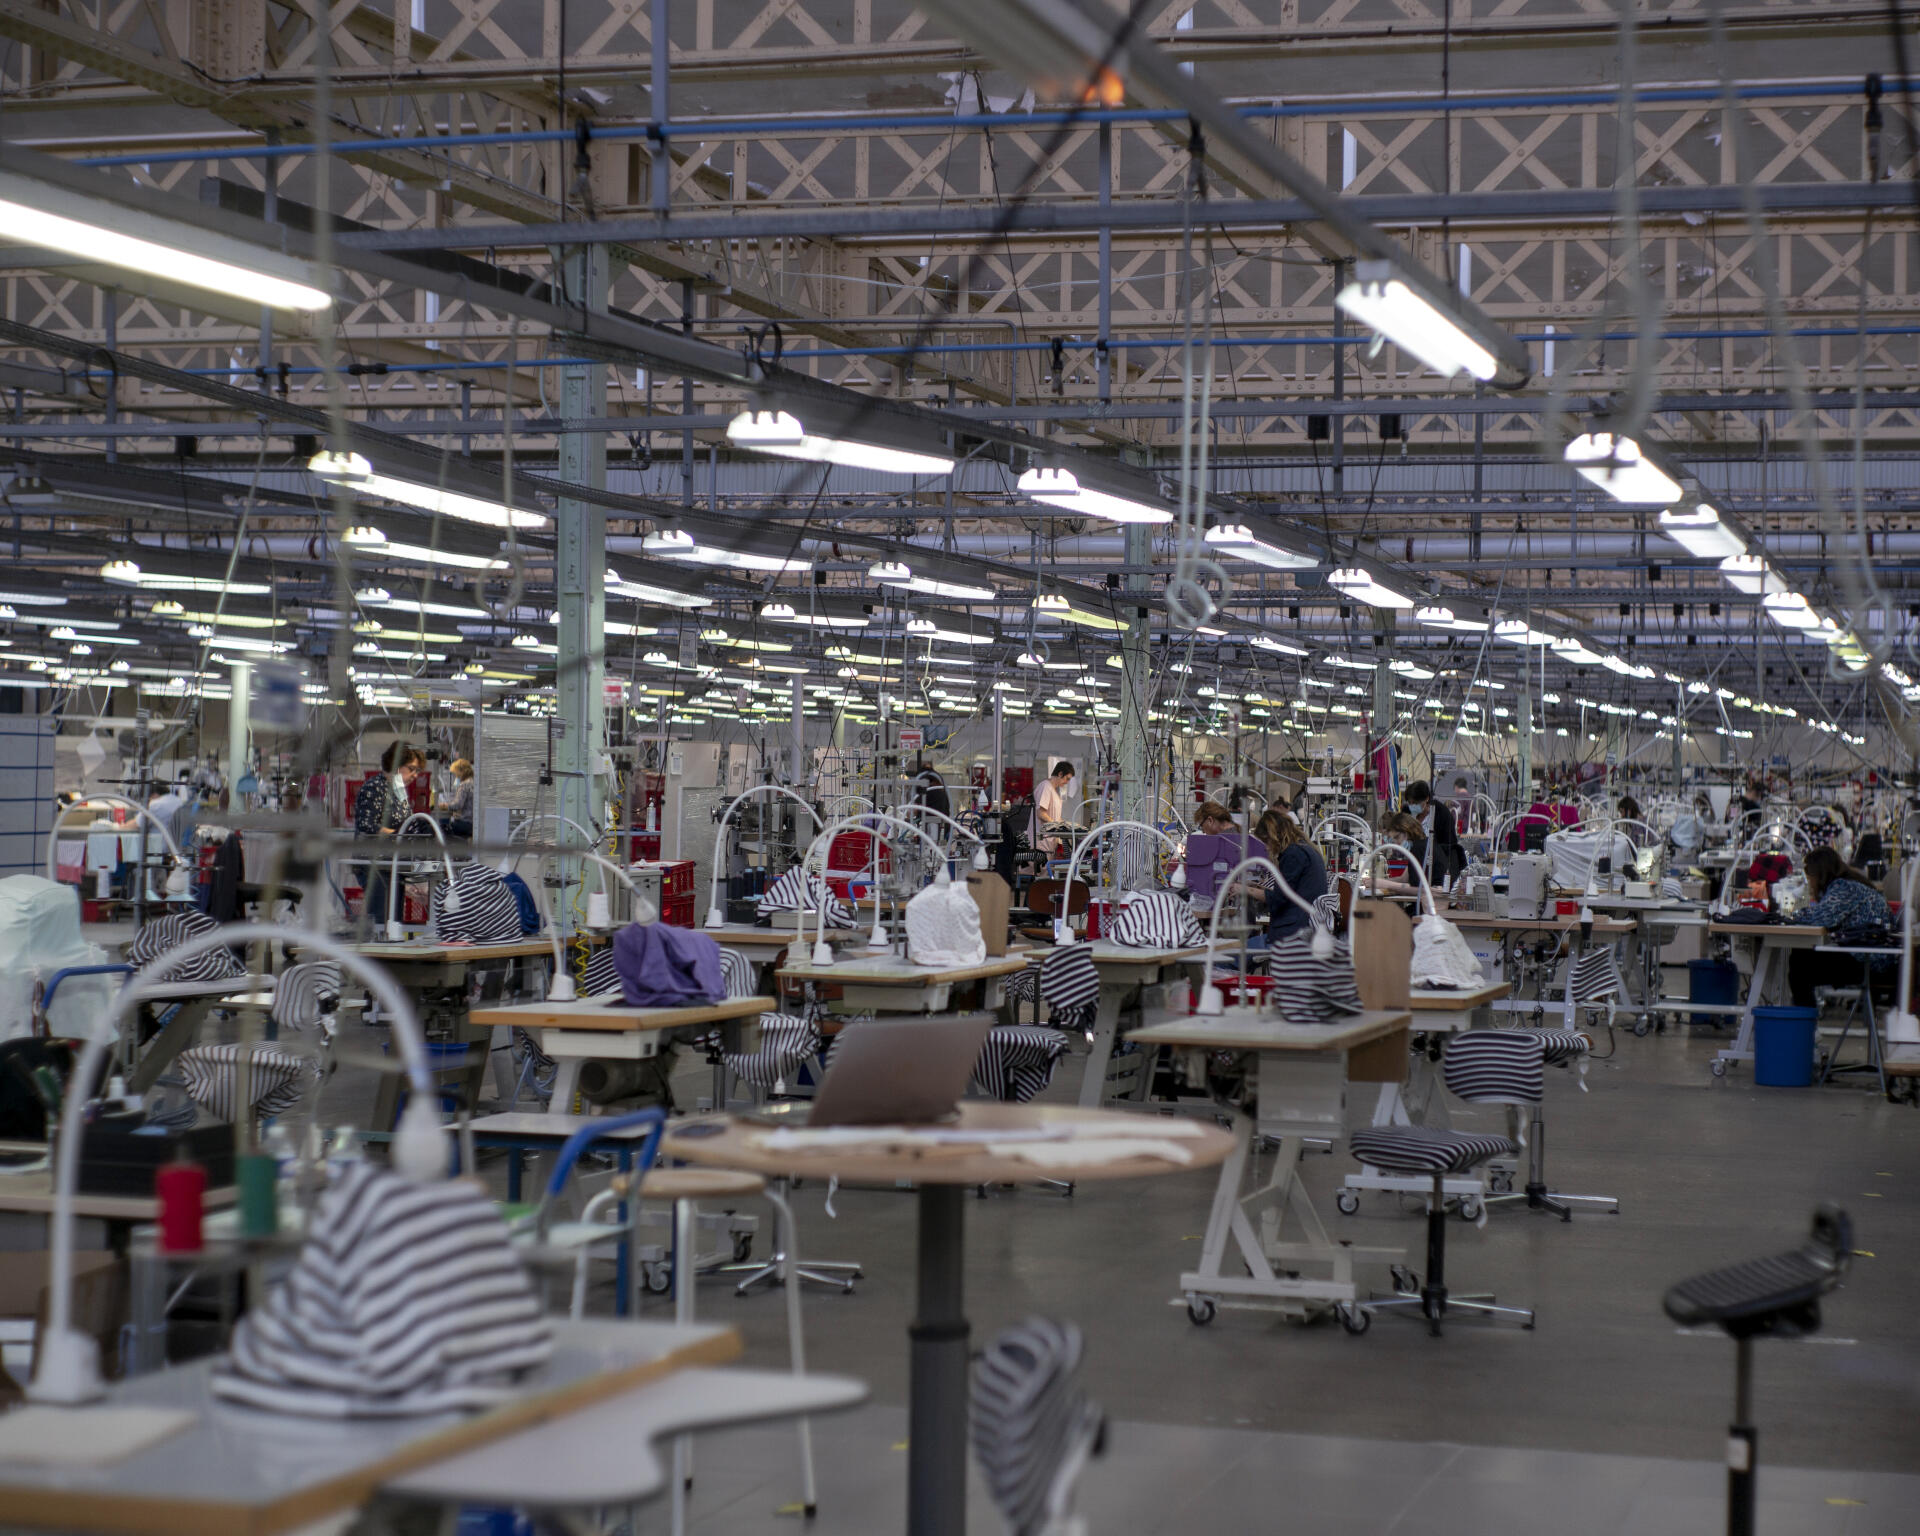 One hundred seamstresses work in the clothing workshop of the Petit Bateau factory in Troyes on October 27, 2021. They produce between 300,000 and 500,000 pieces per year.